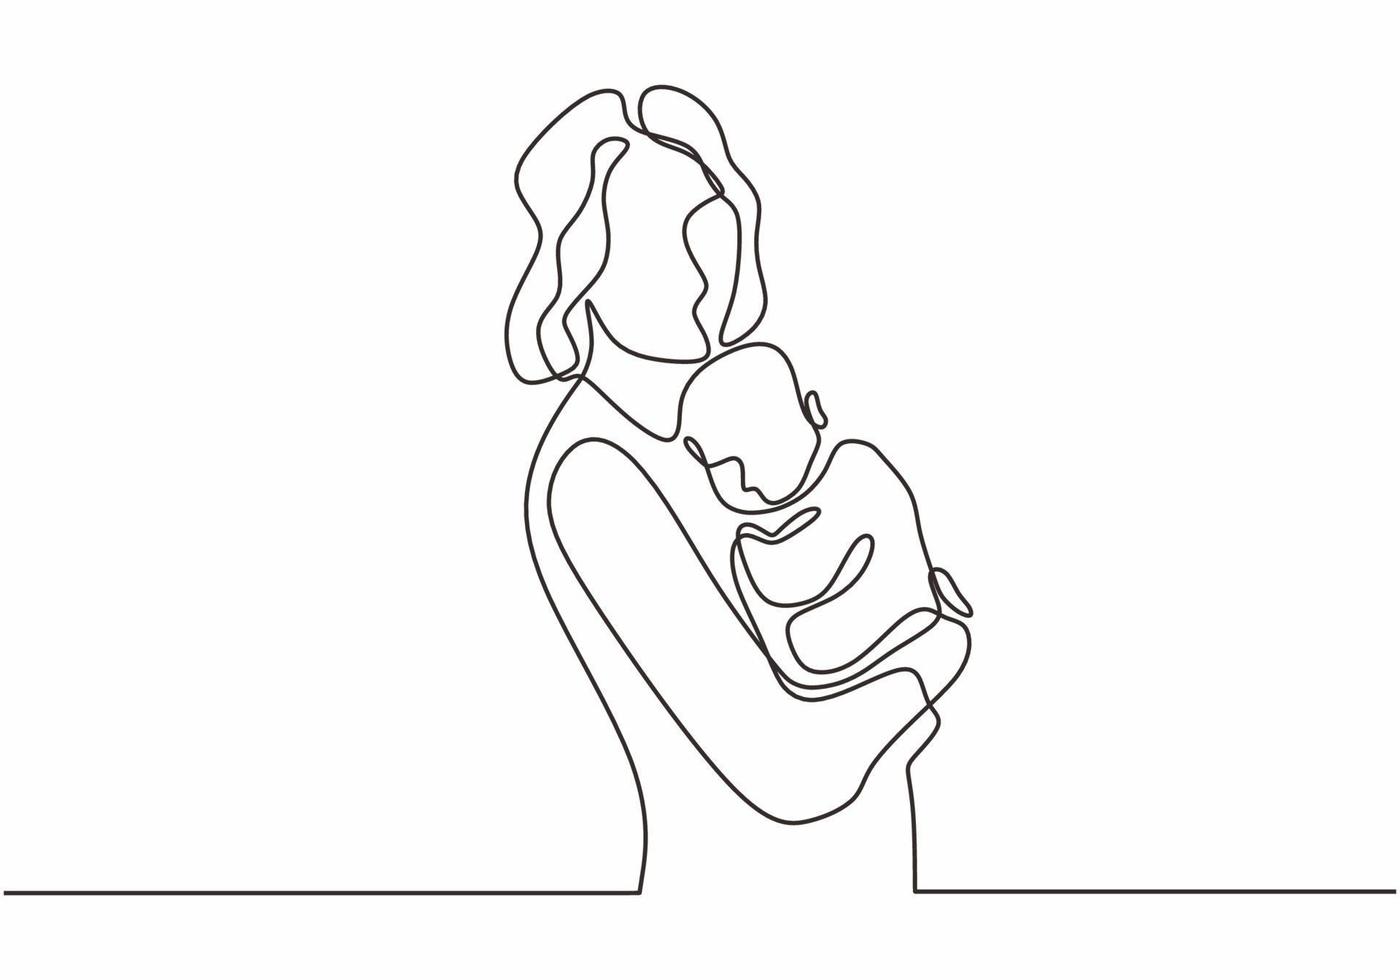 Devices for breastfeeding with milk or infant formula, vector pink icons  set with a woman and a baby. Lactation bottles, sterilizer, bags and a bra  during nursing. Cartoon style illustration 6601621 Vector